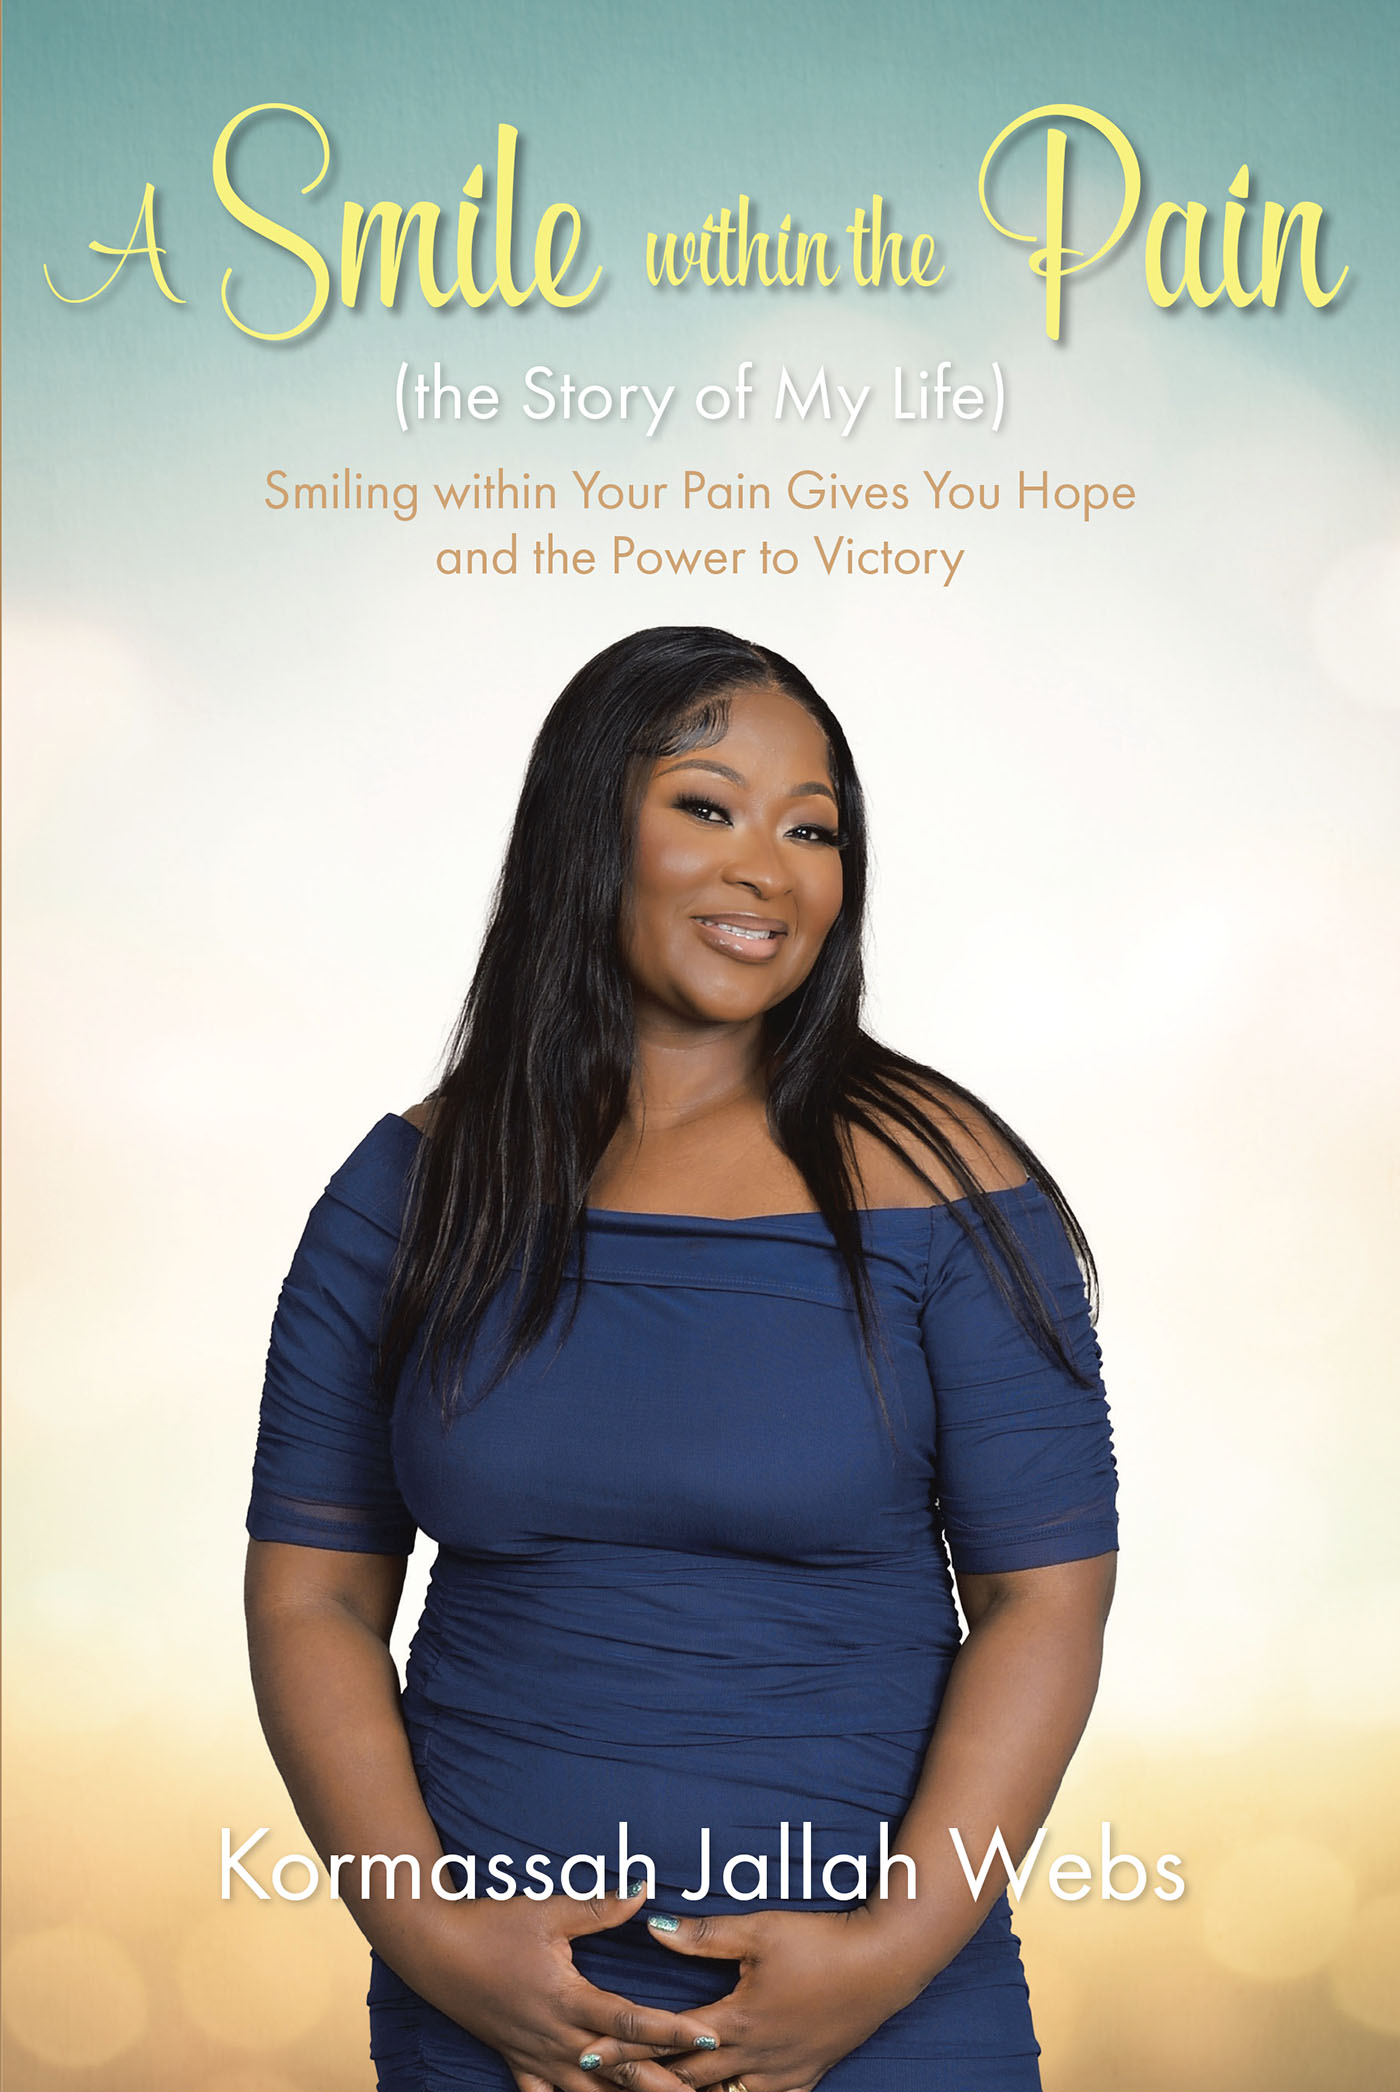 Kormassah Jallah Webs’s Newly Released “A Smile within the Pain (the Story of My Life)” is an Encouraging Examination of Life and Faith